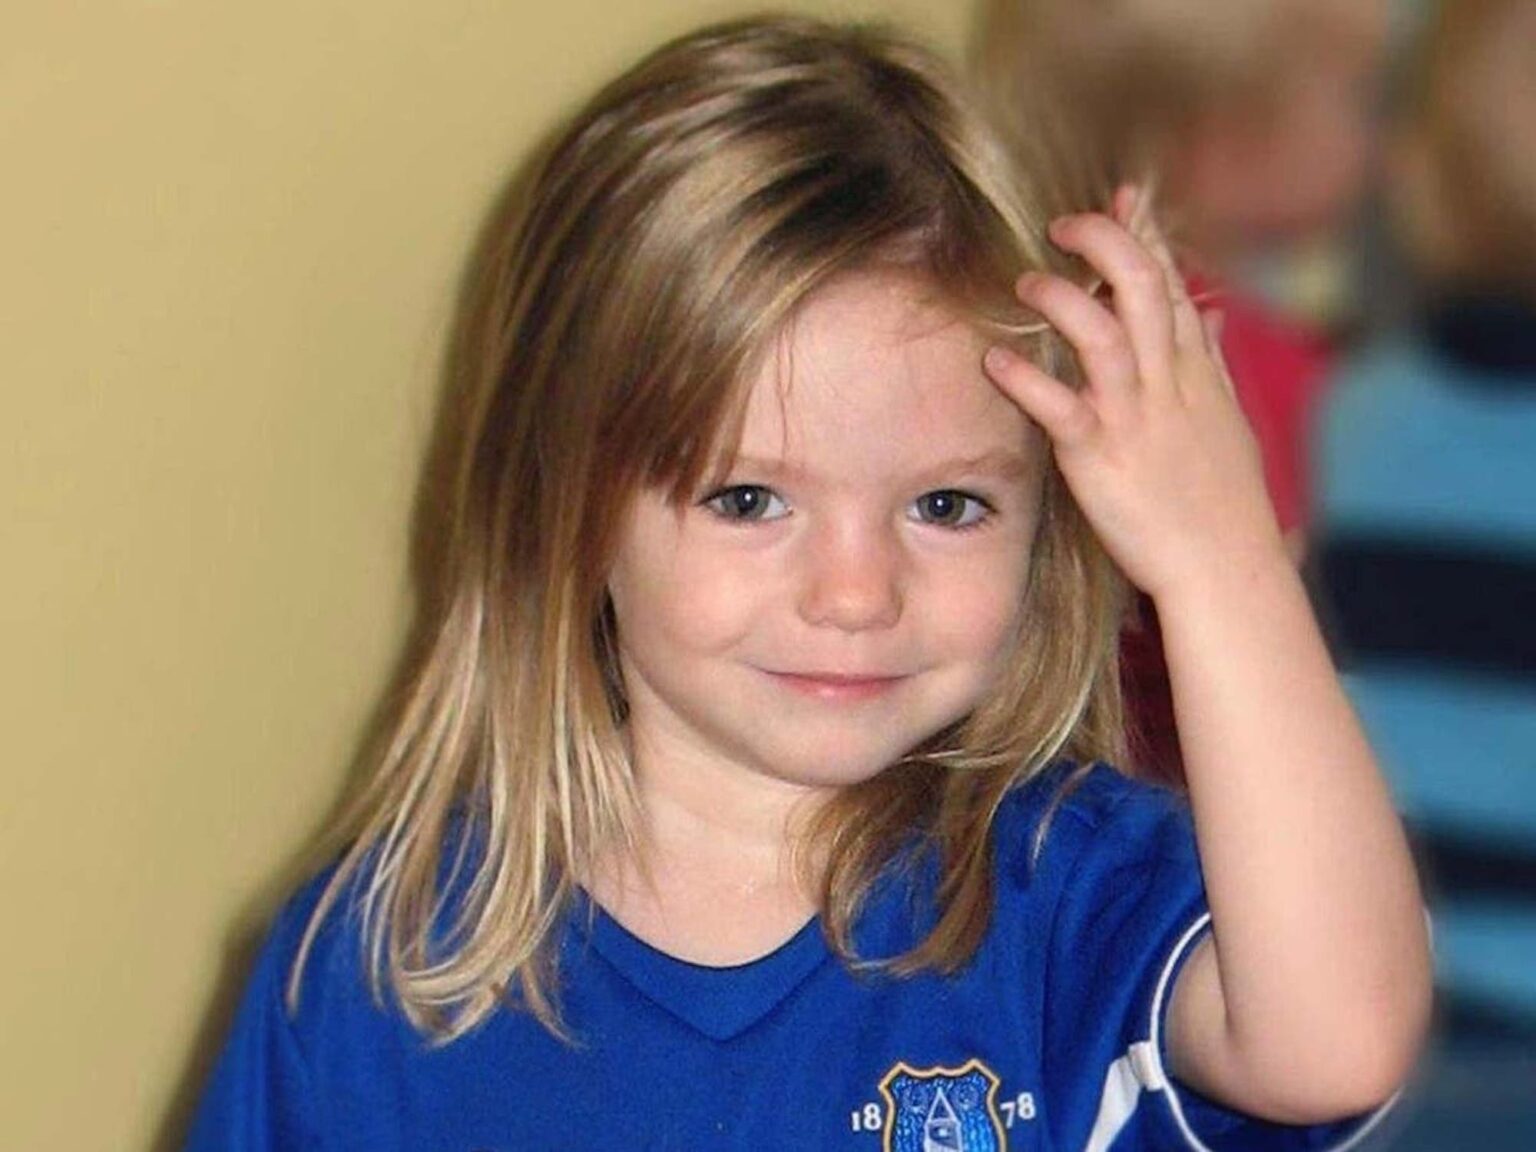 Why is the disappearance of Madeleine McCann still unsolved over a decade of intense investigation later? See the possible reasons.